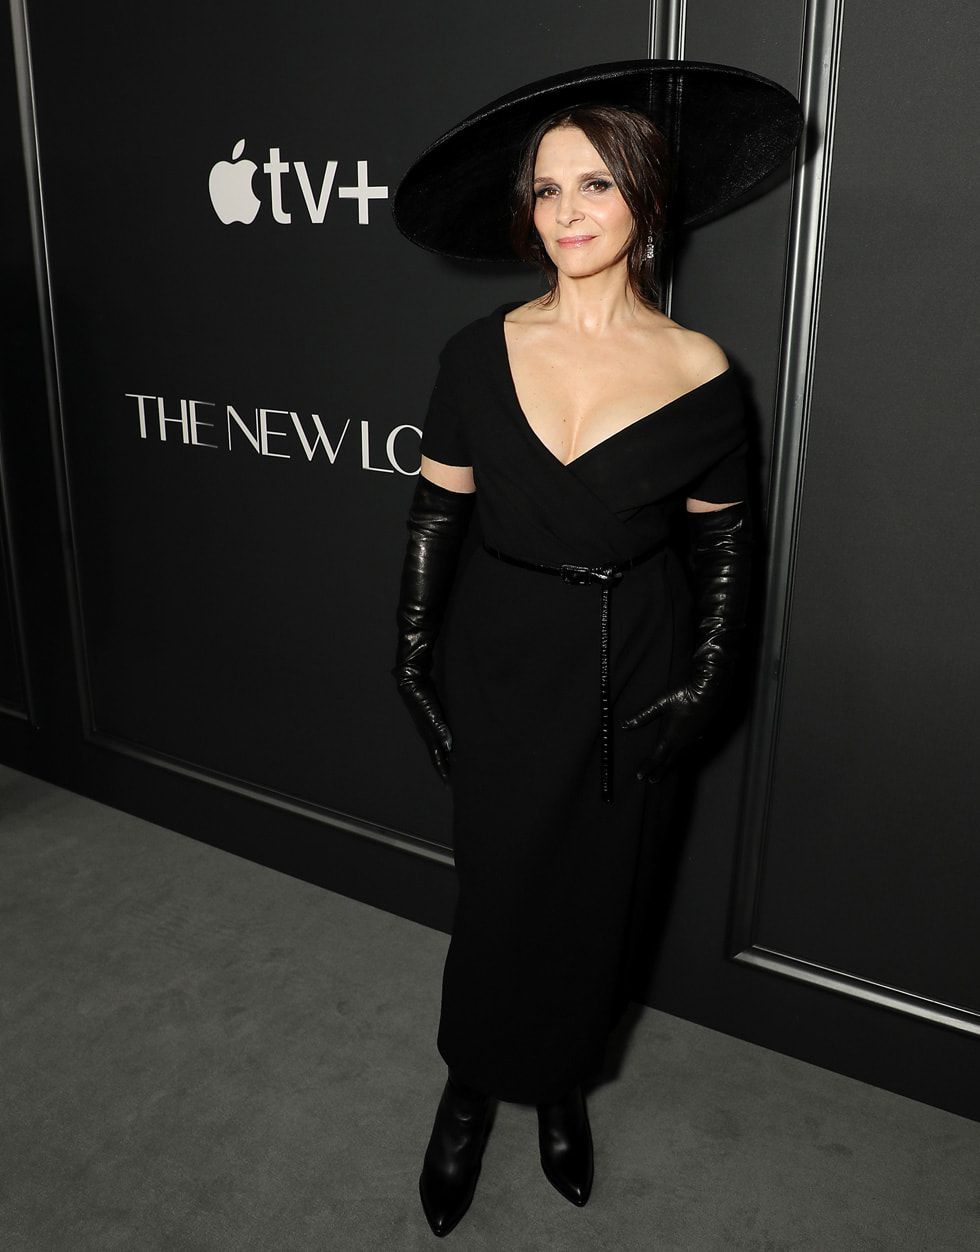 Juliette Binoche attends the premiere of the Apple TV+ thrilling series “The New Look” at Florence Gould Hall. “The New Look” will make its global debut on Apple TV+ on Wednesday, 14 February 2024.